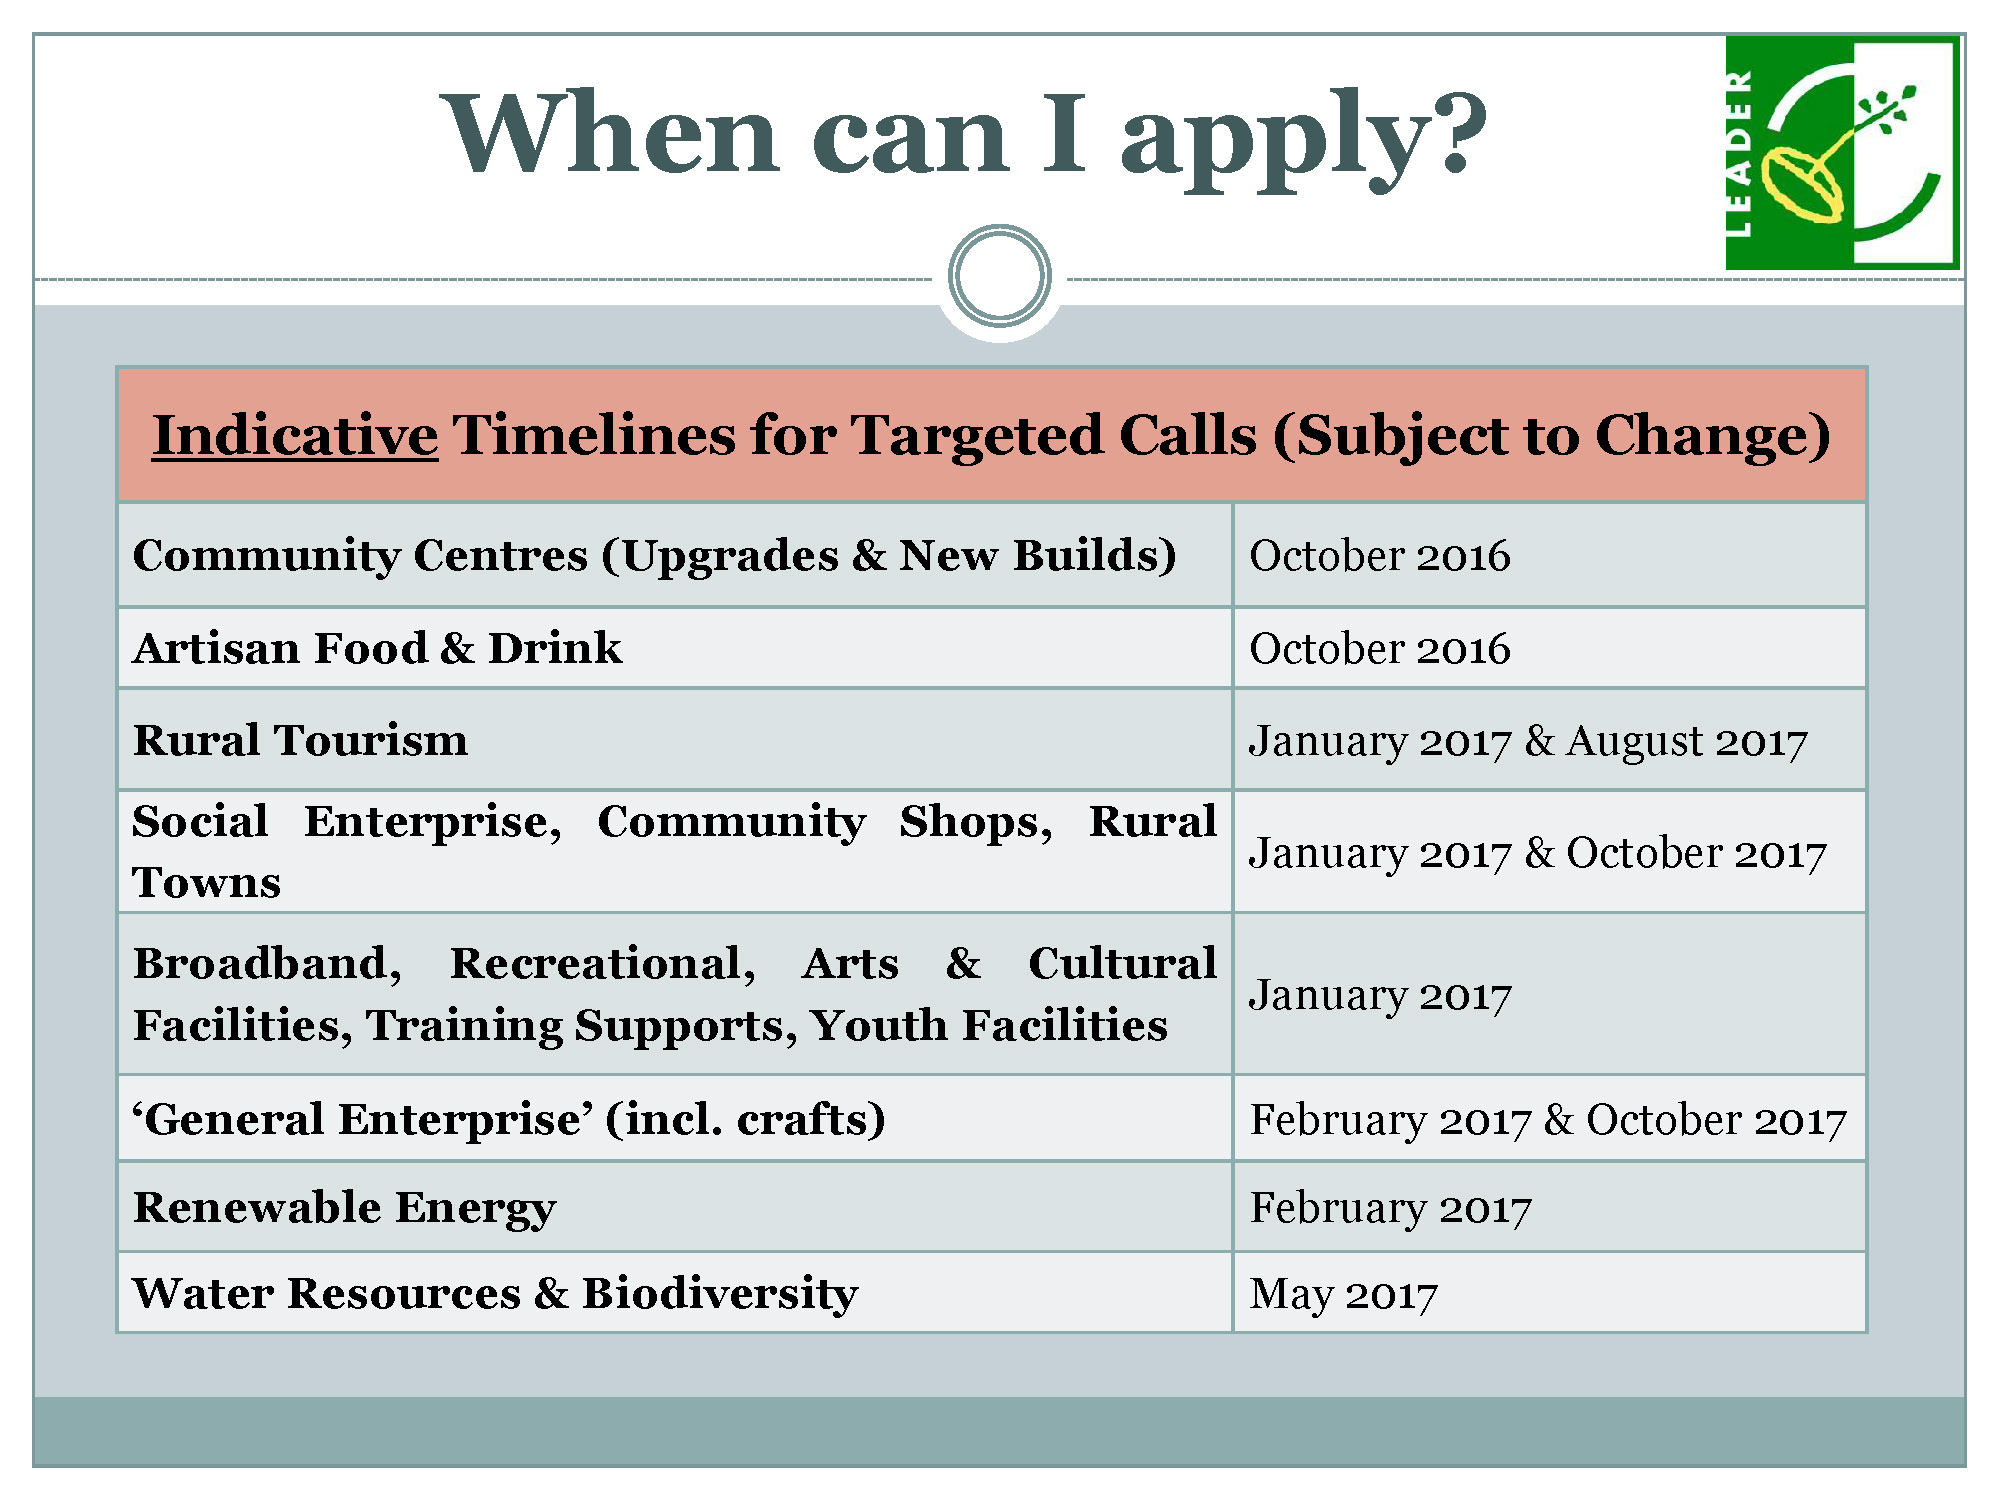 LEADER Programme Indicative Timelines 2016 - When can I apply?